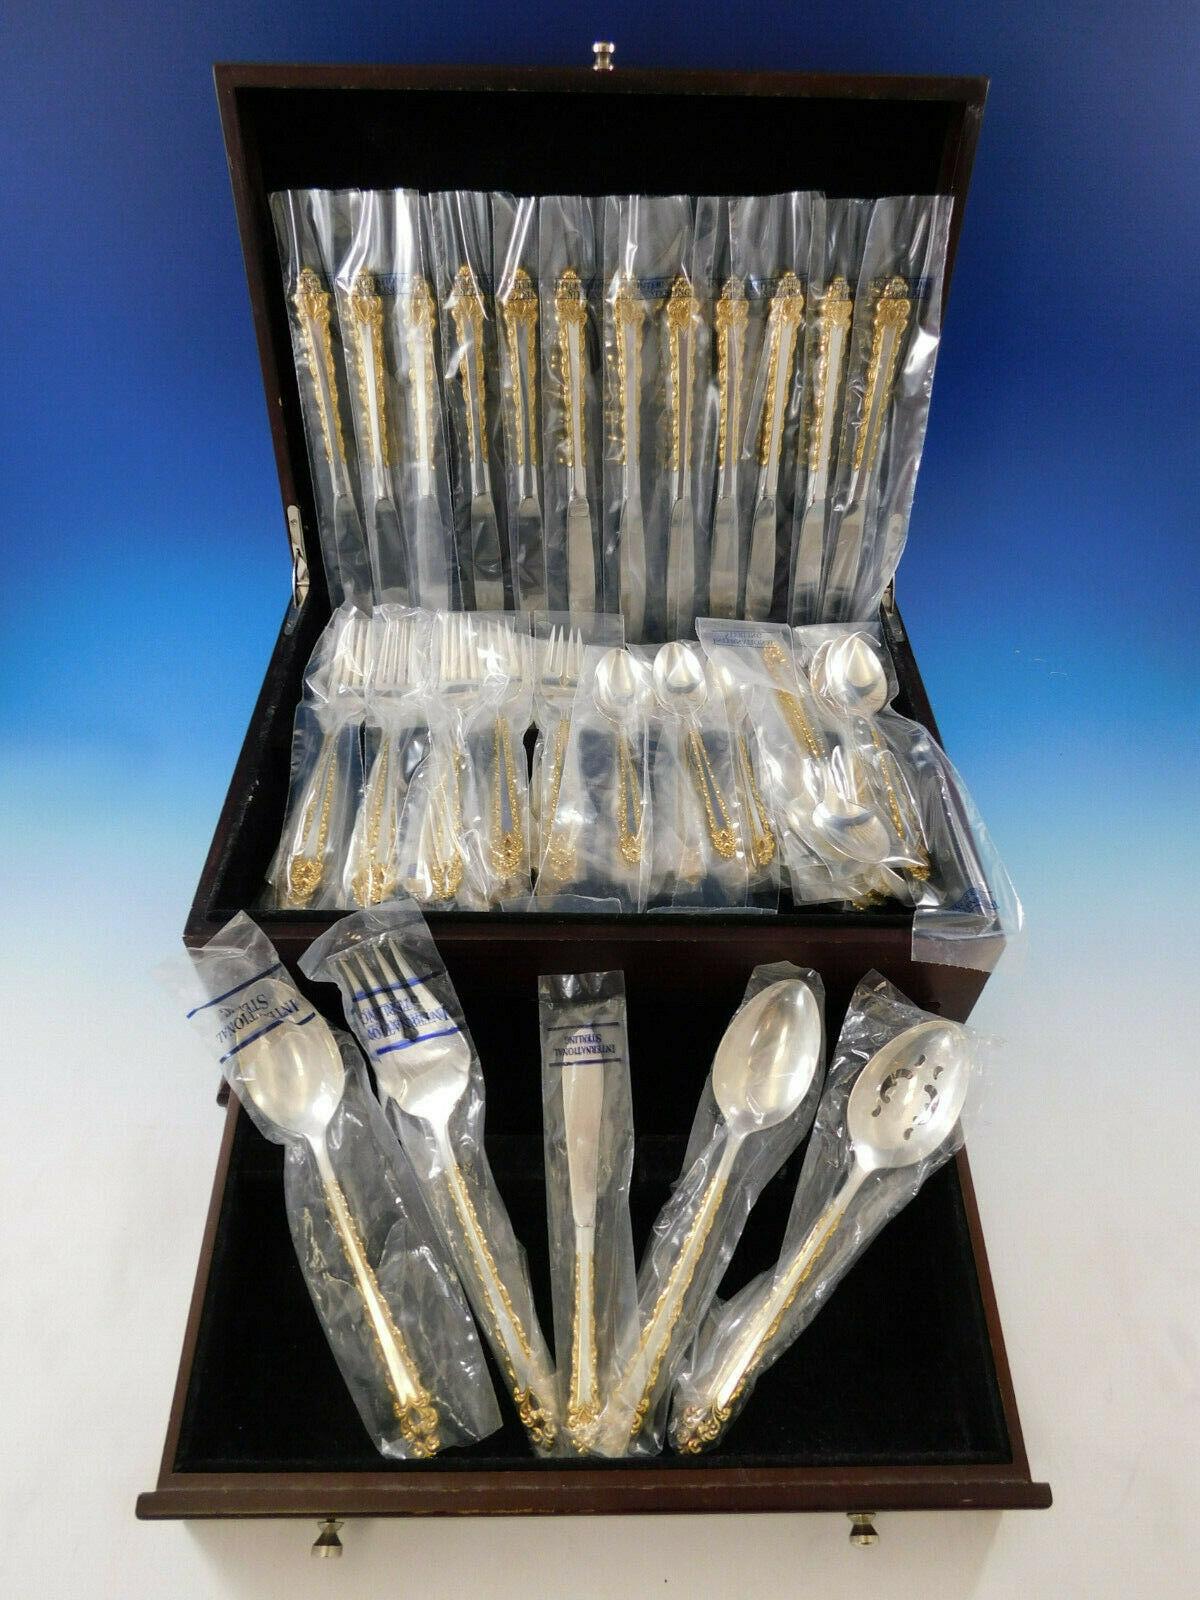 New, unused Golden La Strada by International sterling silver Flatware set with gold accents, 65 pieces. This pattern was introduced in the year 1972 and was discontinued in 2001. This set includes:

 12 place knives, 9 1/4